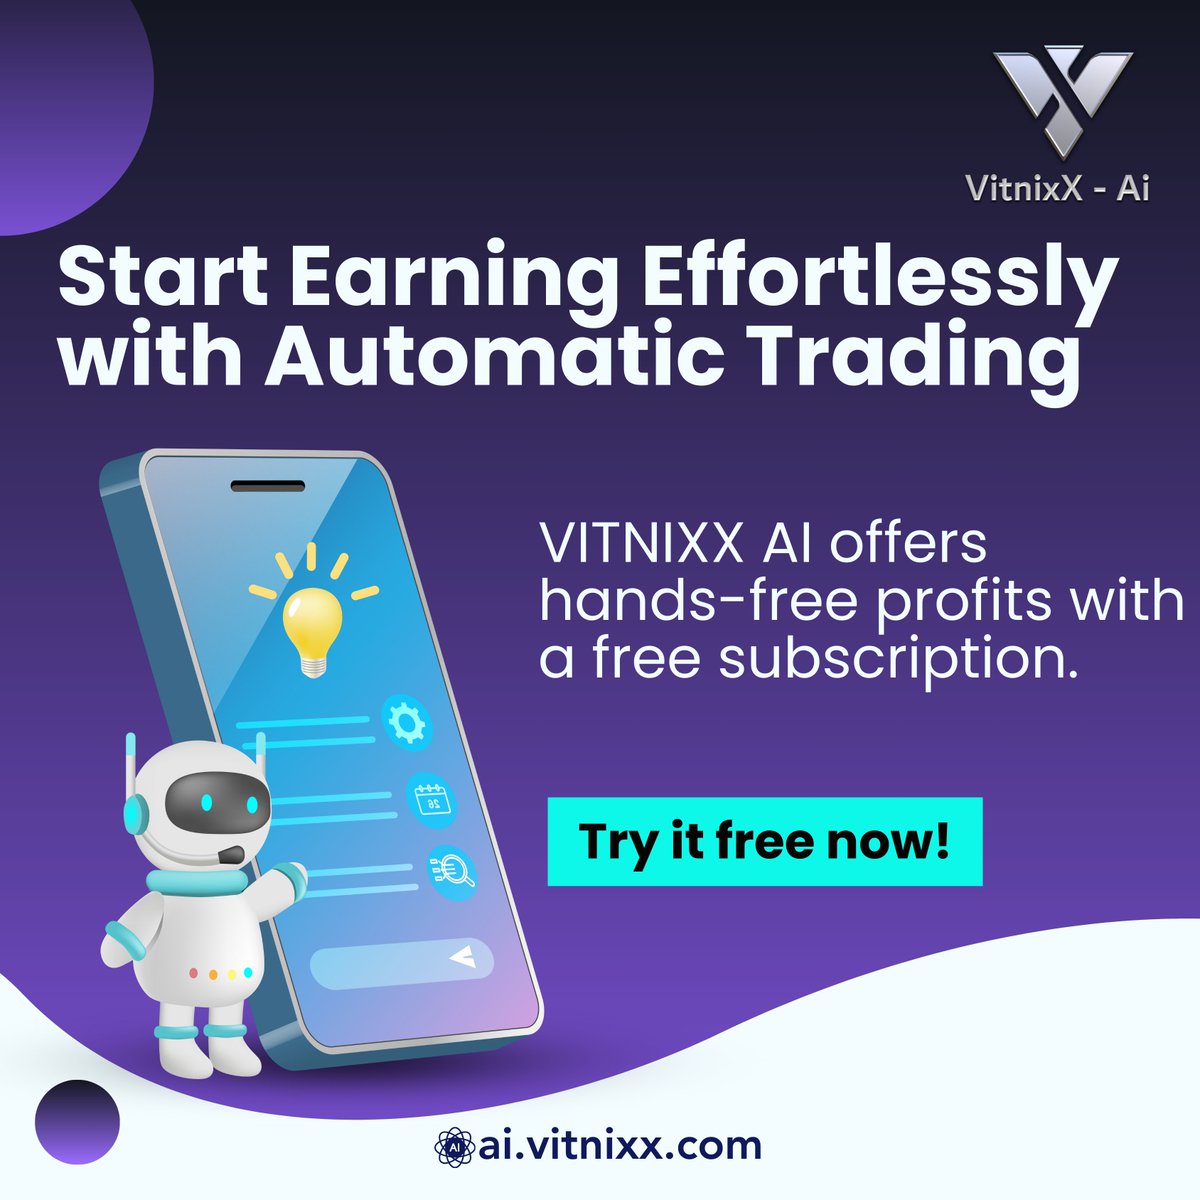 Effortless trading, guaranteed returns. Let VITNIXX AI automate your trades and start earning passively today. Sign up for free! 💻💵 
#EffortlessProfits #FreeSignup